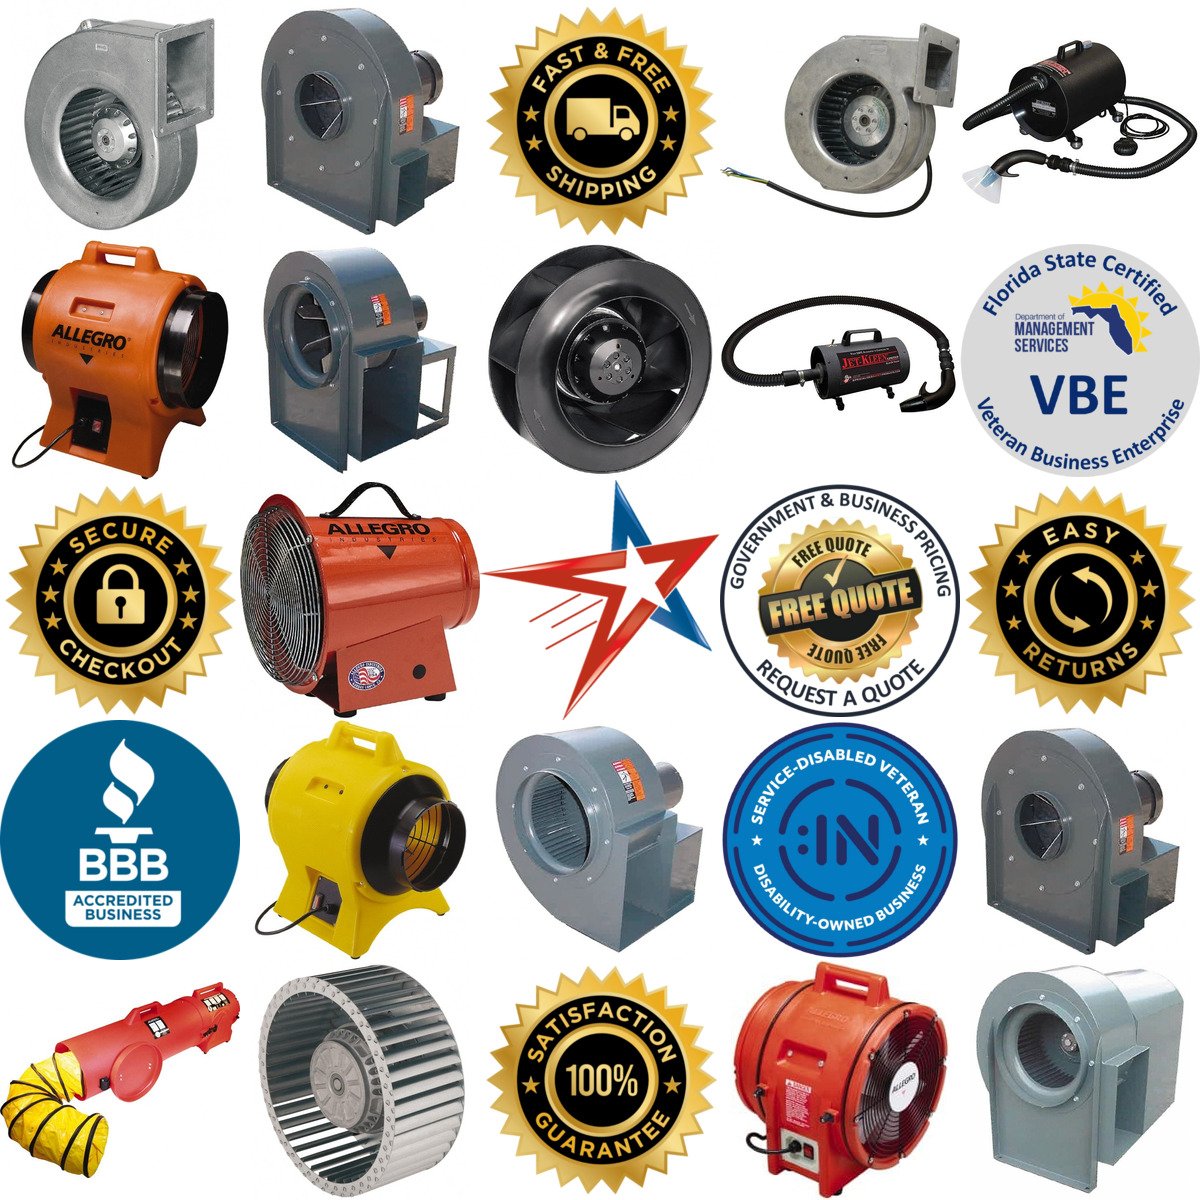 A selection of Blowers and Blower Accessories products on GoVets